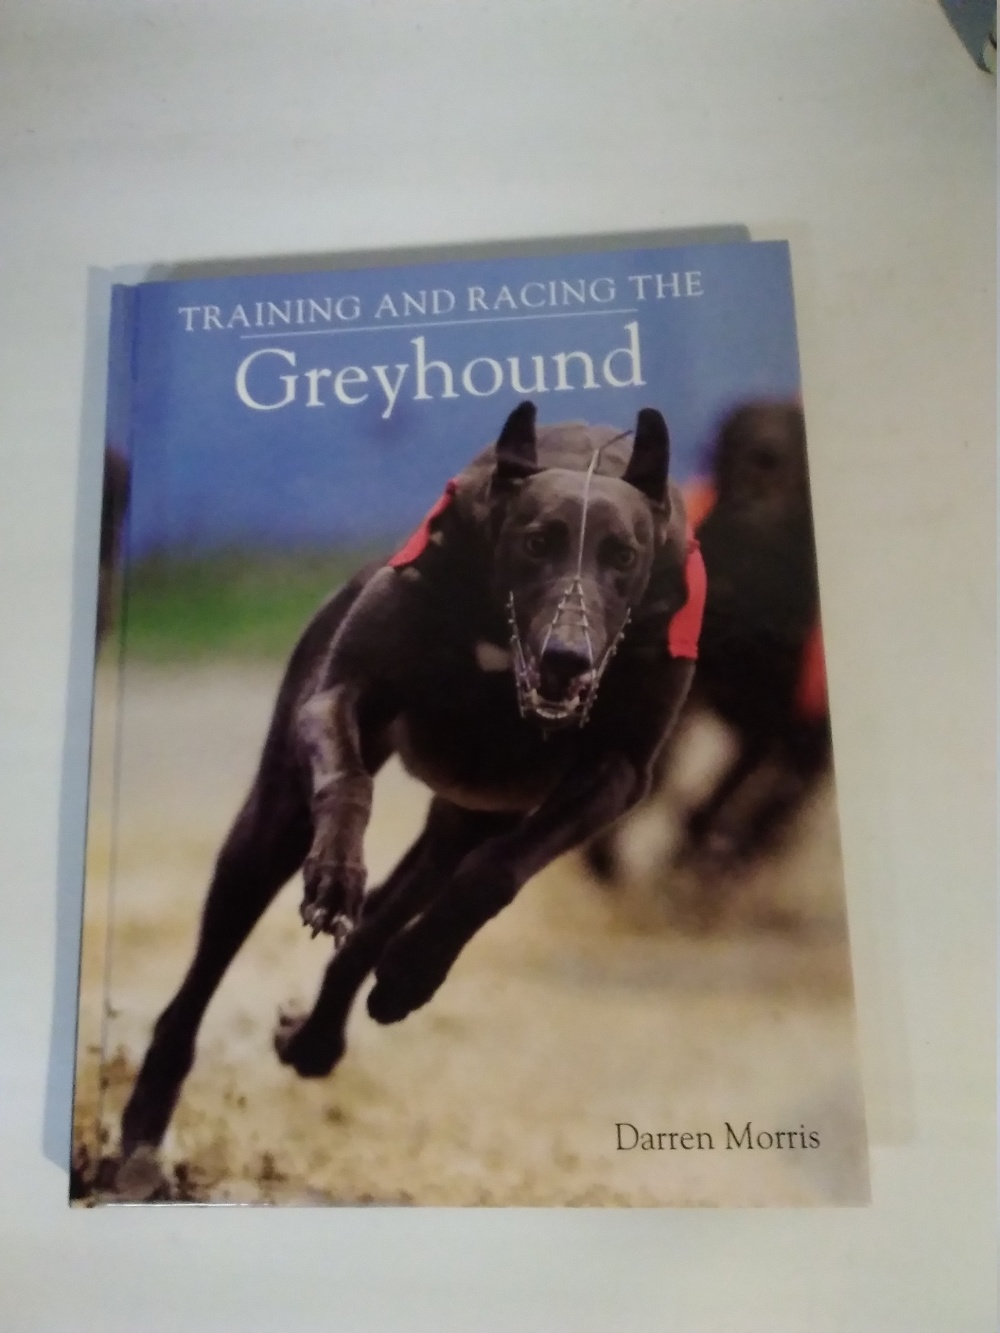 BOOKS ON GREYHOUNDS to include 'Training and Racing The Greyhound' by Darren Morris 2009, 'George - Image 3 of 3